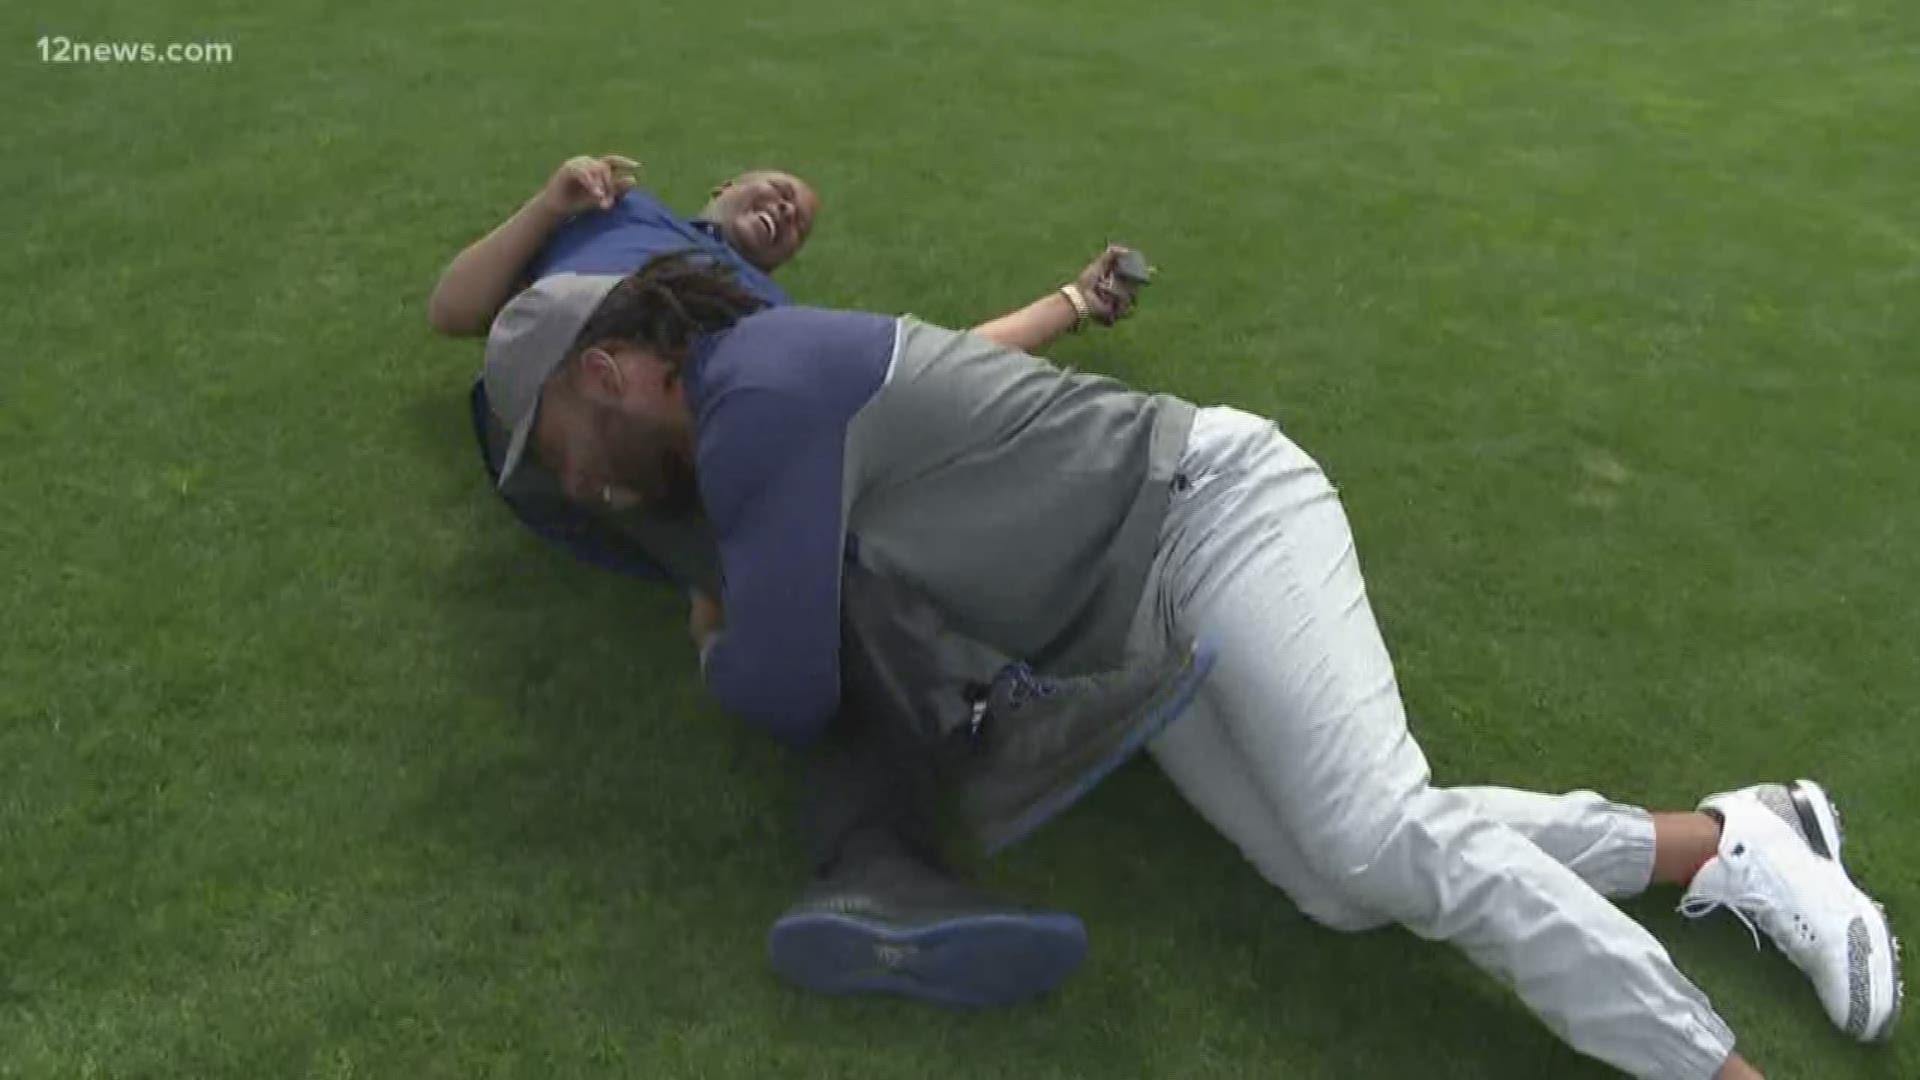 Bruce Cooper took a tumble down the 10th hole at the Waste Management Phoenix Open Wednesday. Cardinals player Larry Fitzgerald may have had something to with it!